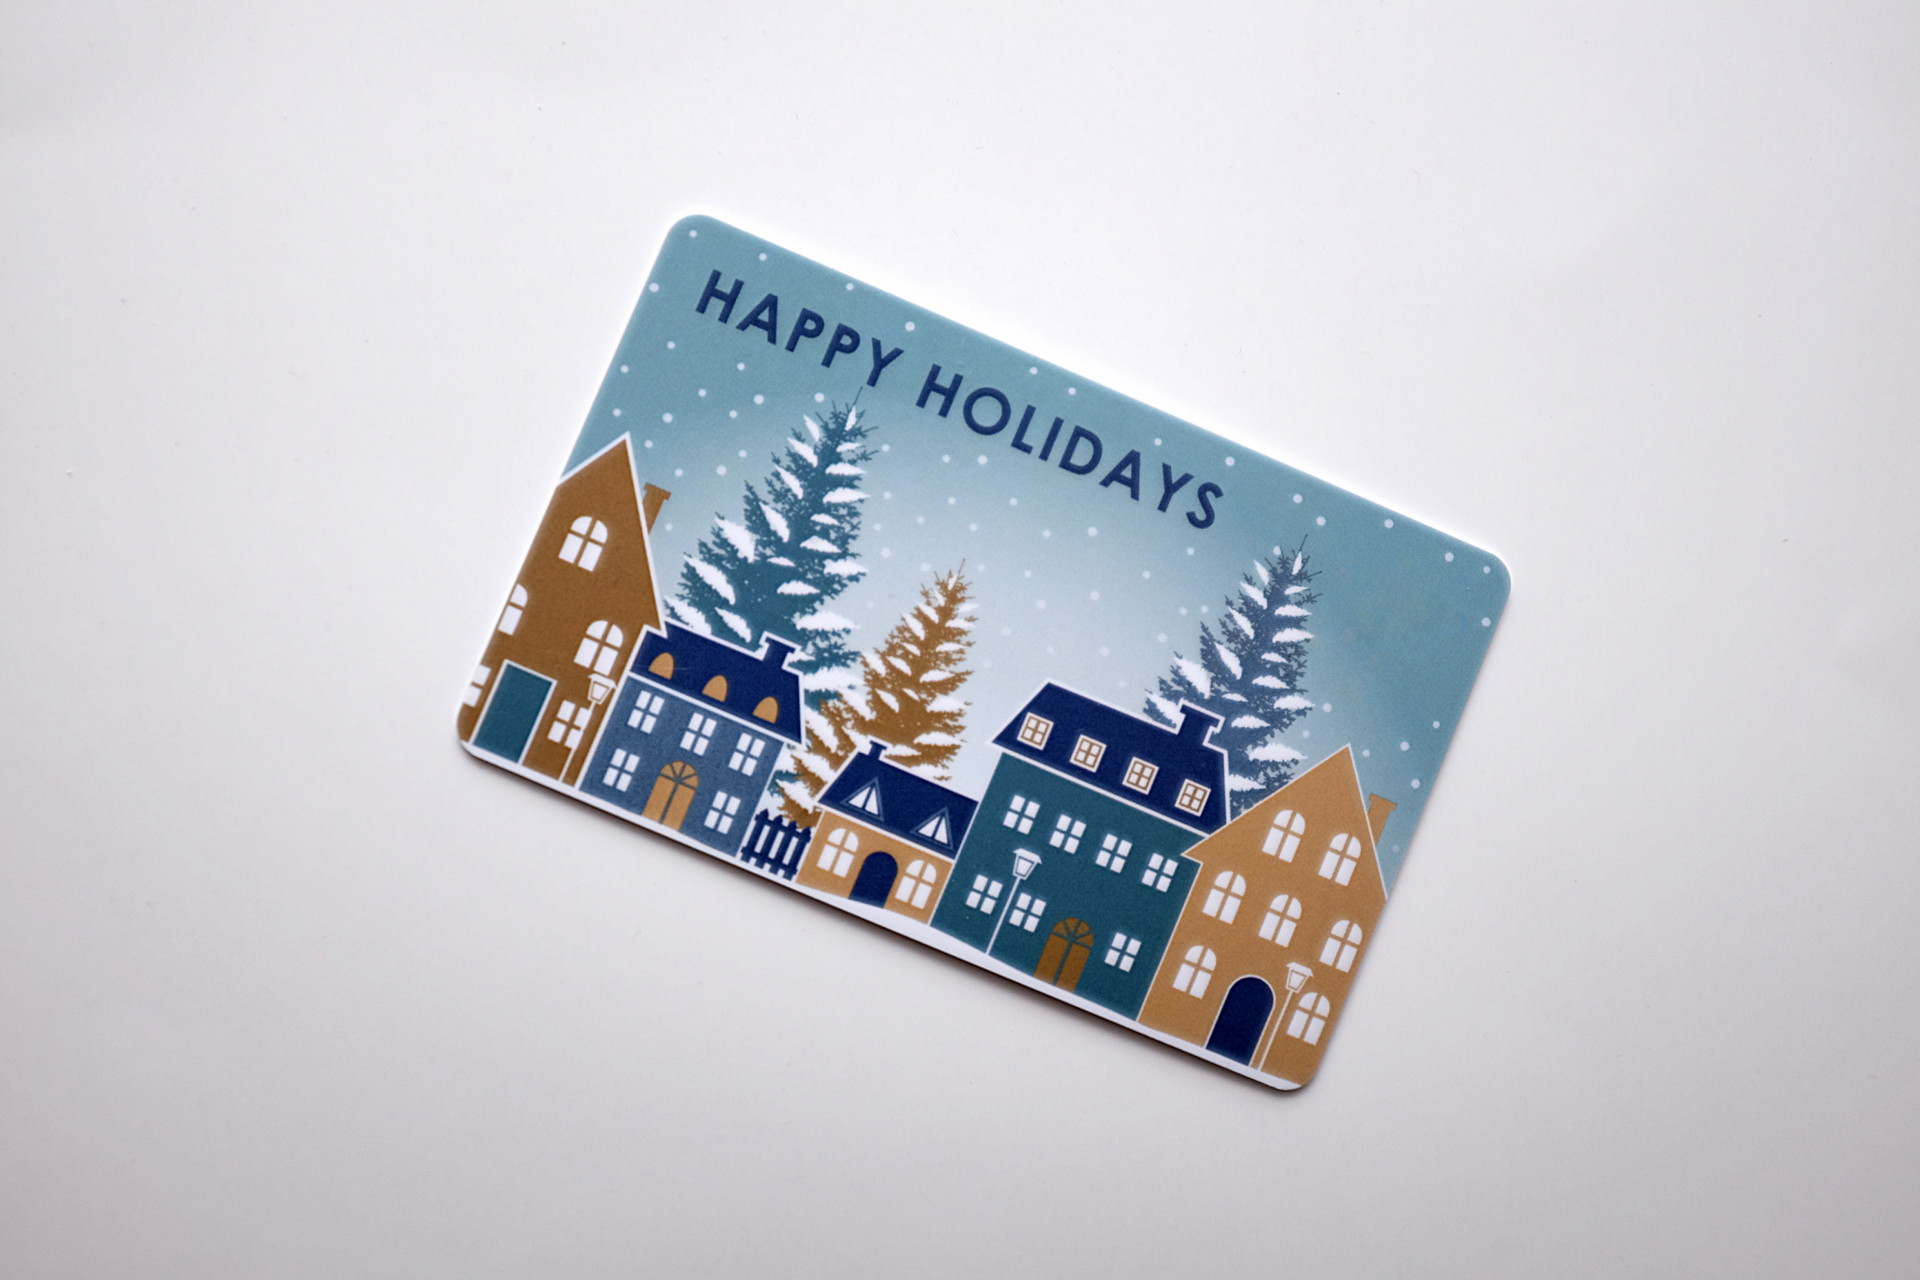 Gift card on a white background that reads "HAPPY HOLIDAYS" and features a winter city scene with buildings and trees and snow